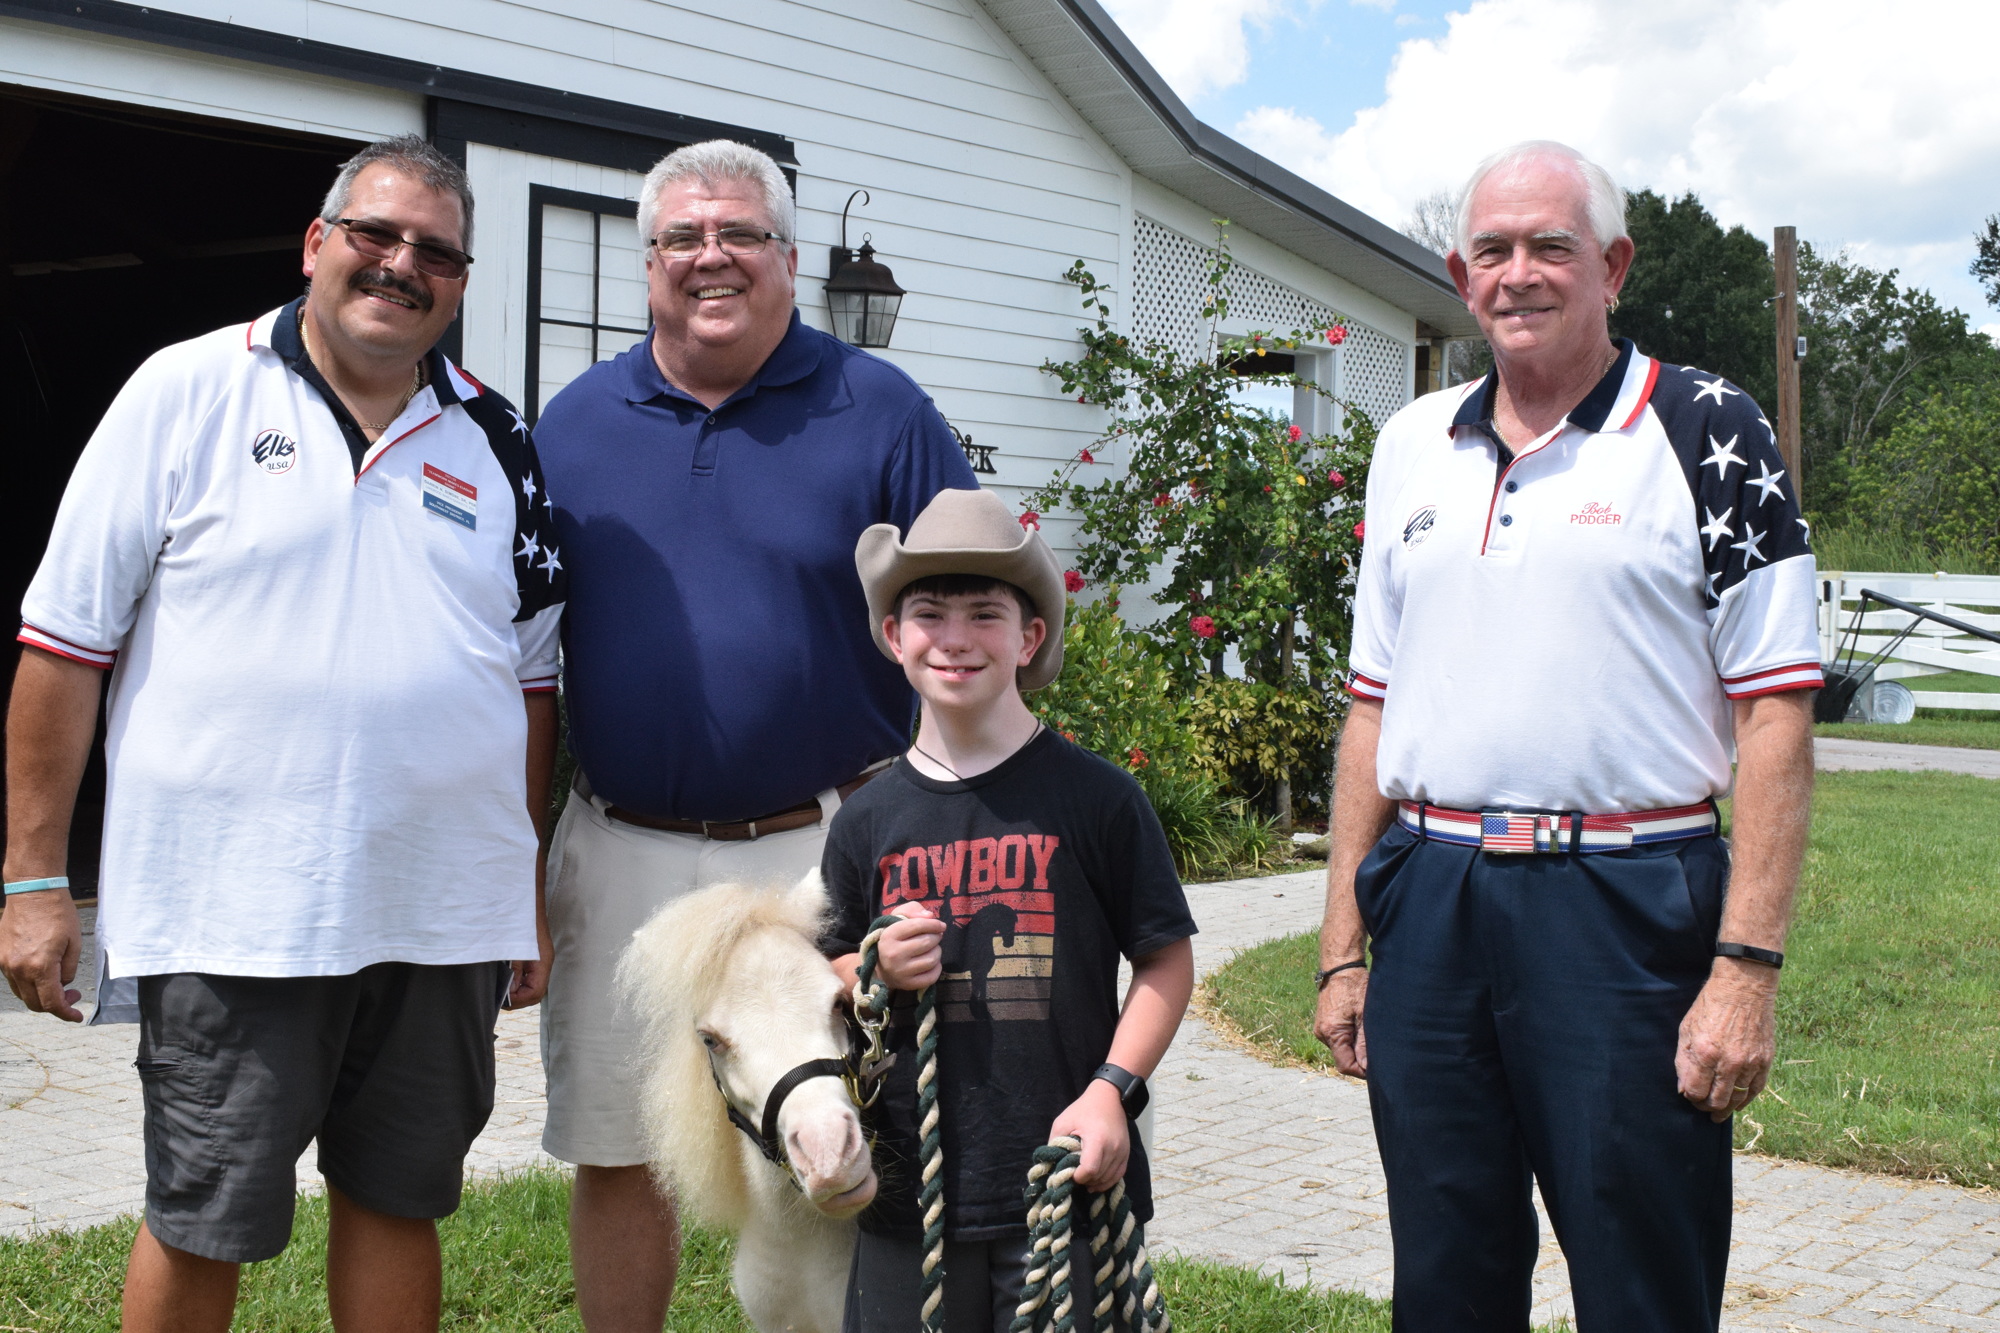 Elks Darrin Simone, Dan Tabor and Bob Erwin donate to Hooves with H.E.A.R.T. to support riders like Mason Kramer (front).